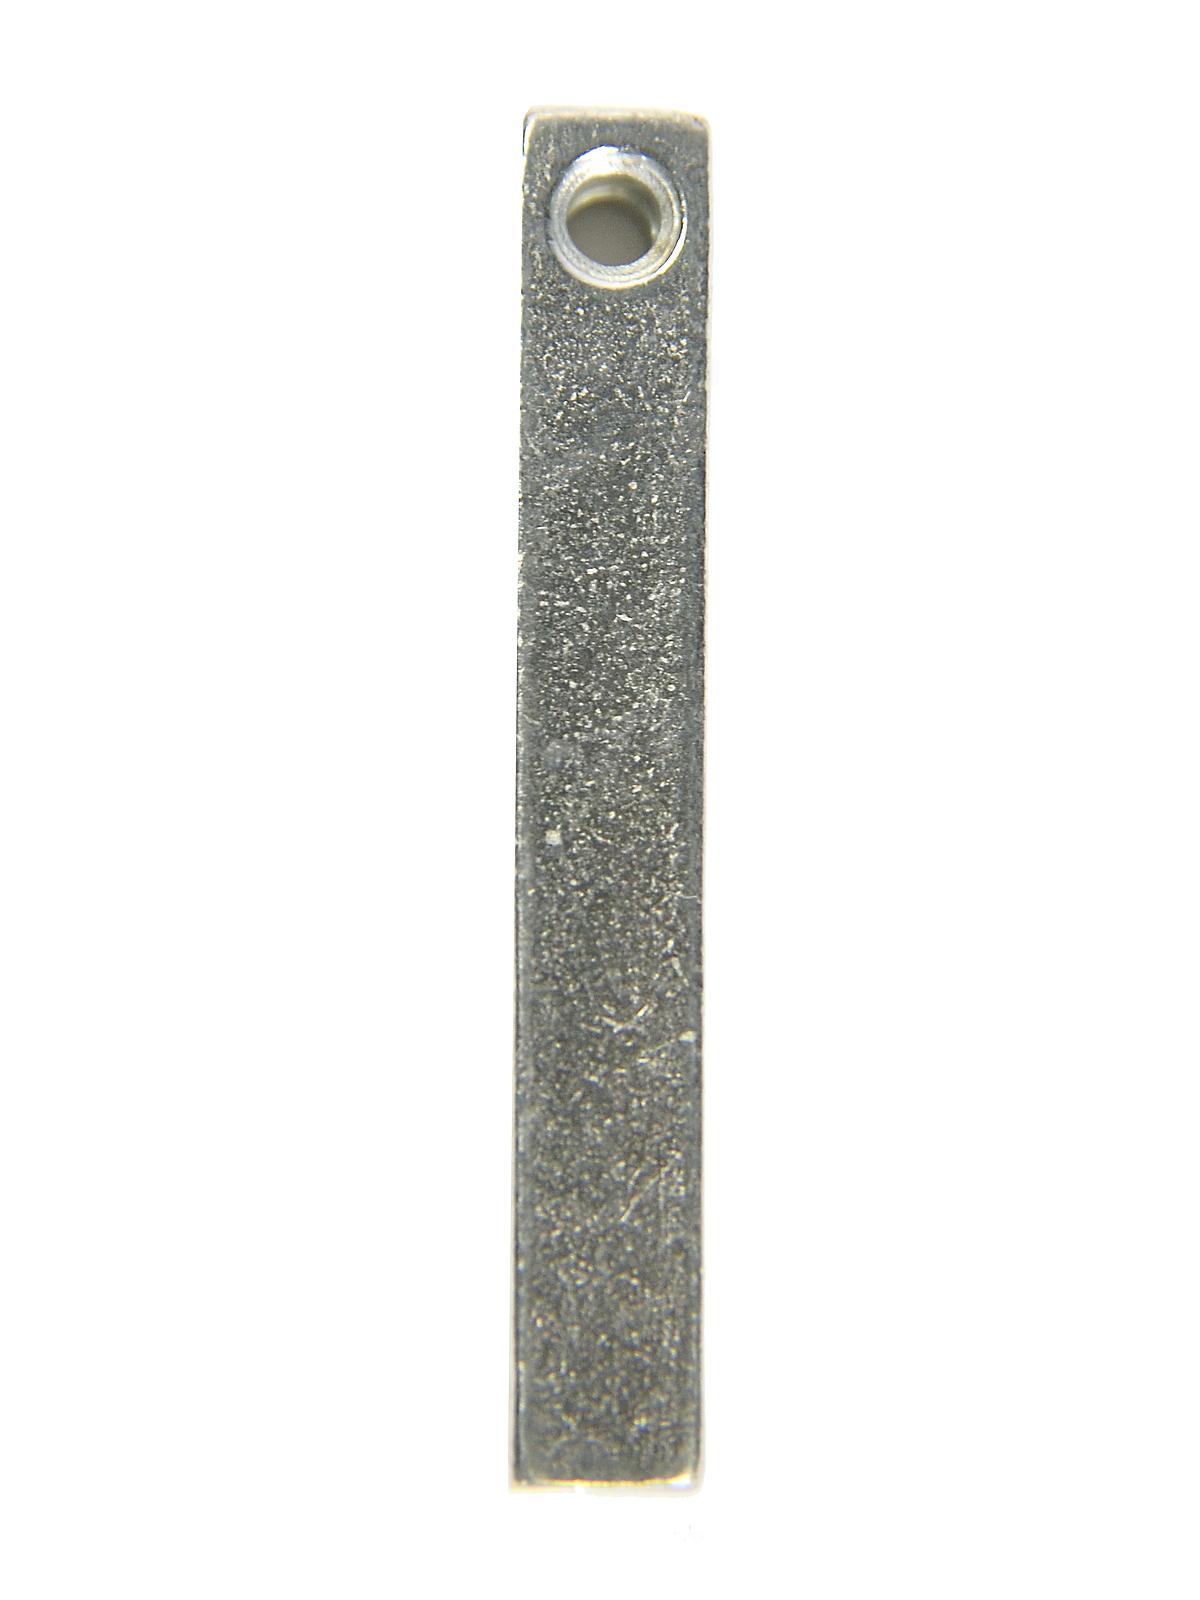 Pewter Metal Blanks Rectangle Bar 1 1 2 In. X 3 4 In. Each